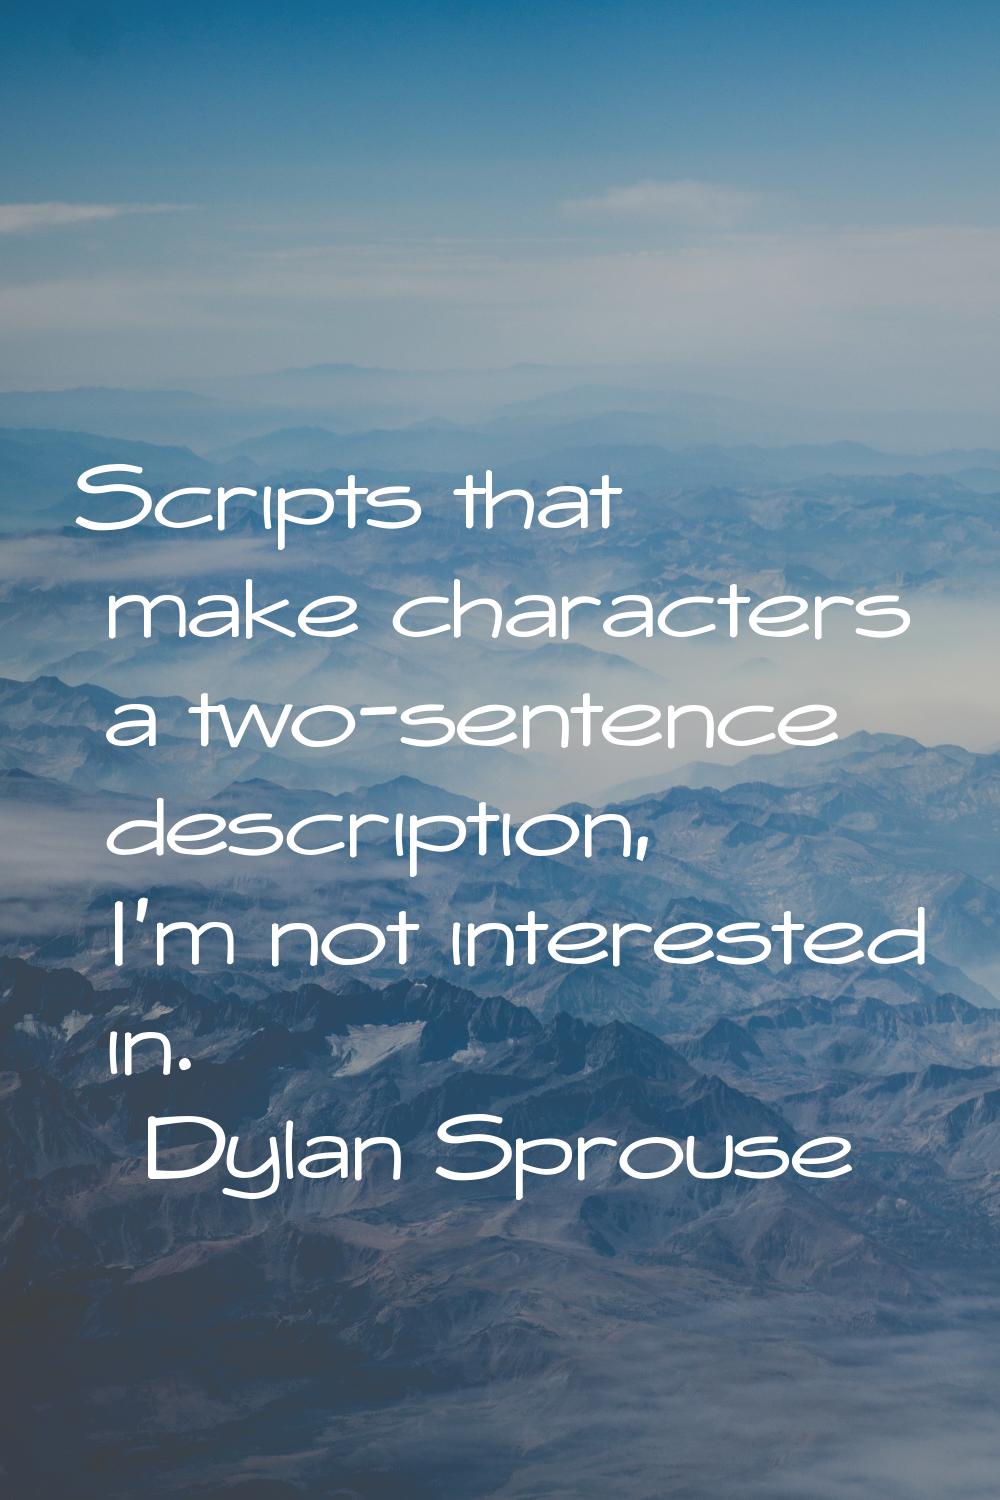 Scripts that make characters a two-sentence description, I'm not interested in.